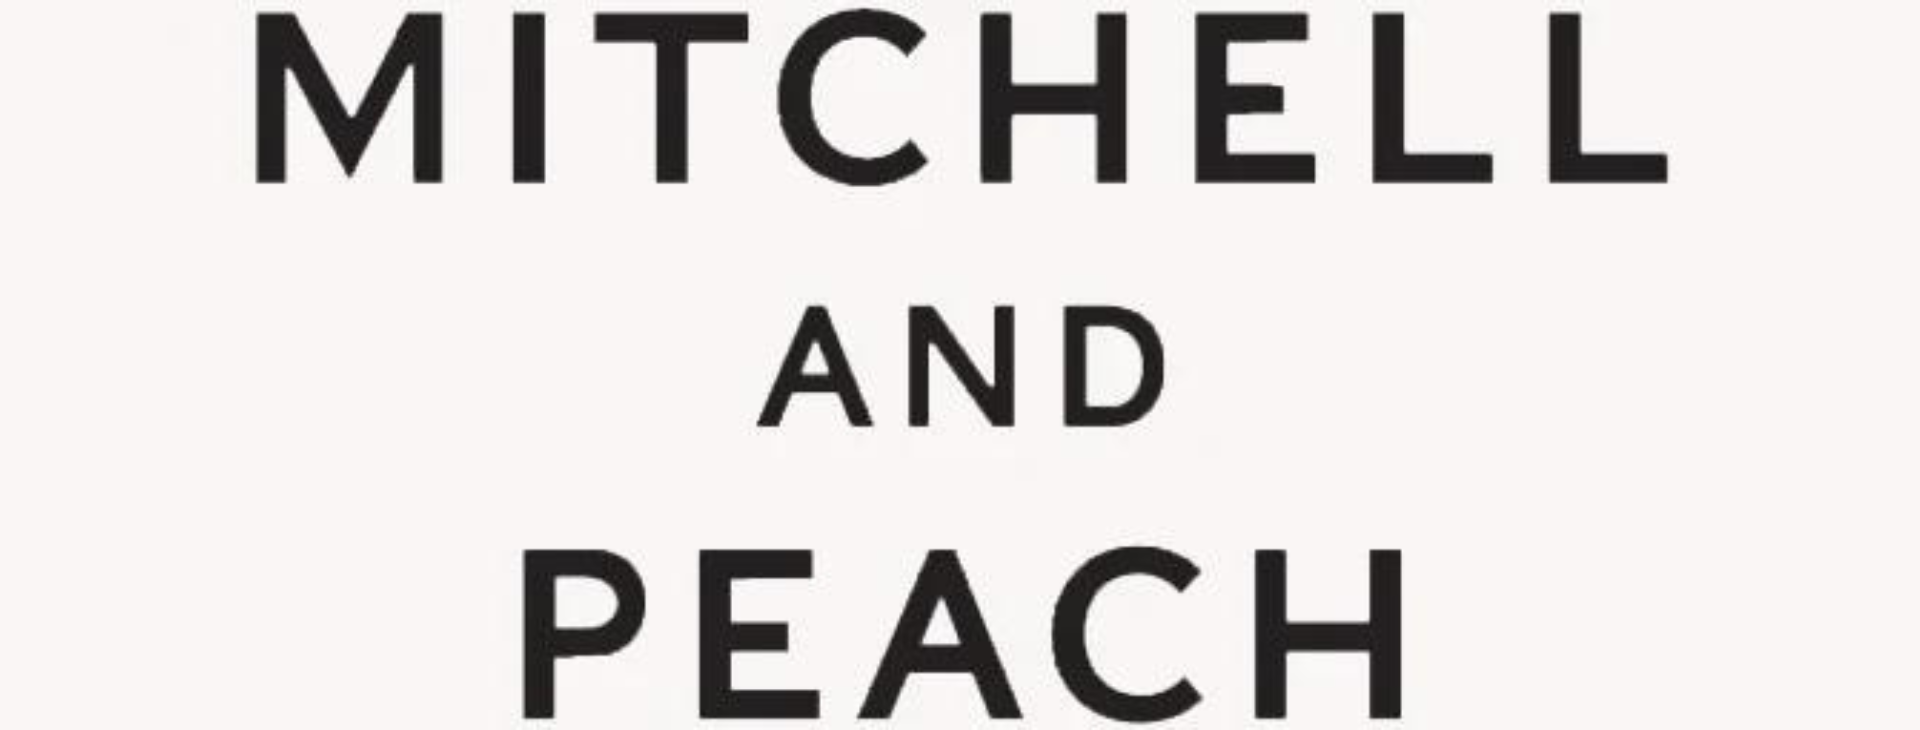 MITCHELL AND PEACH